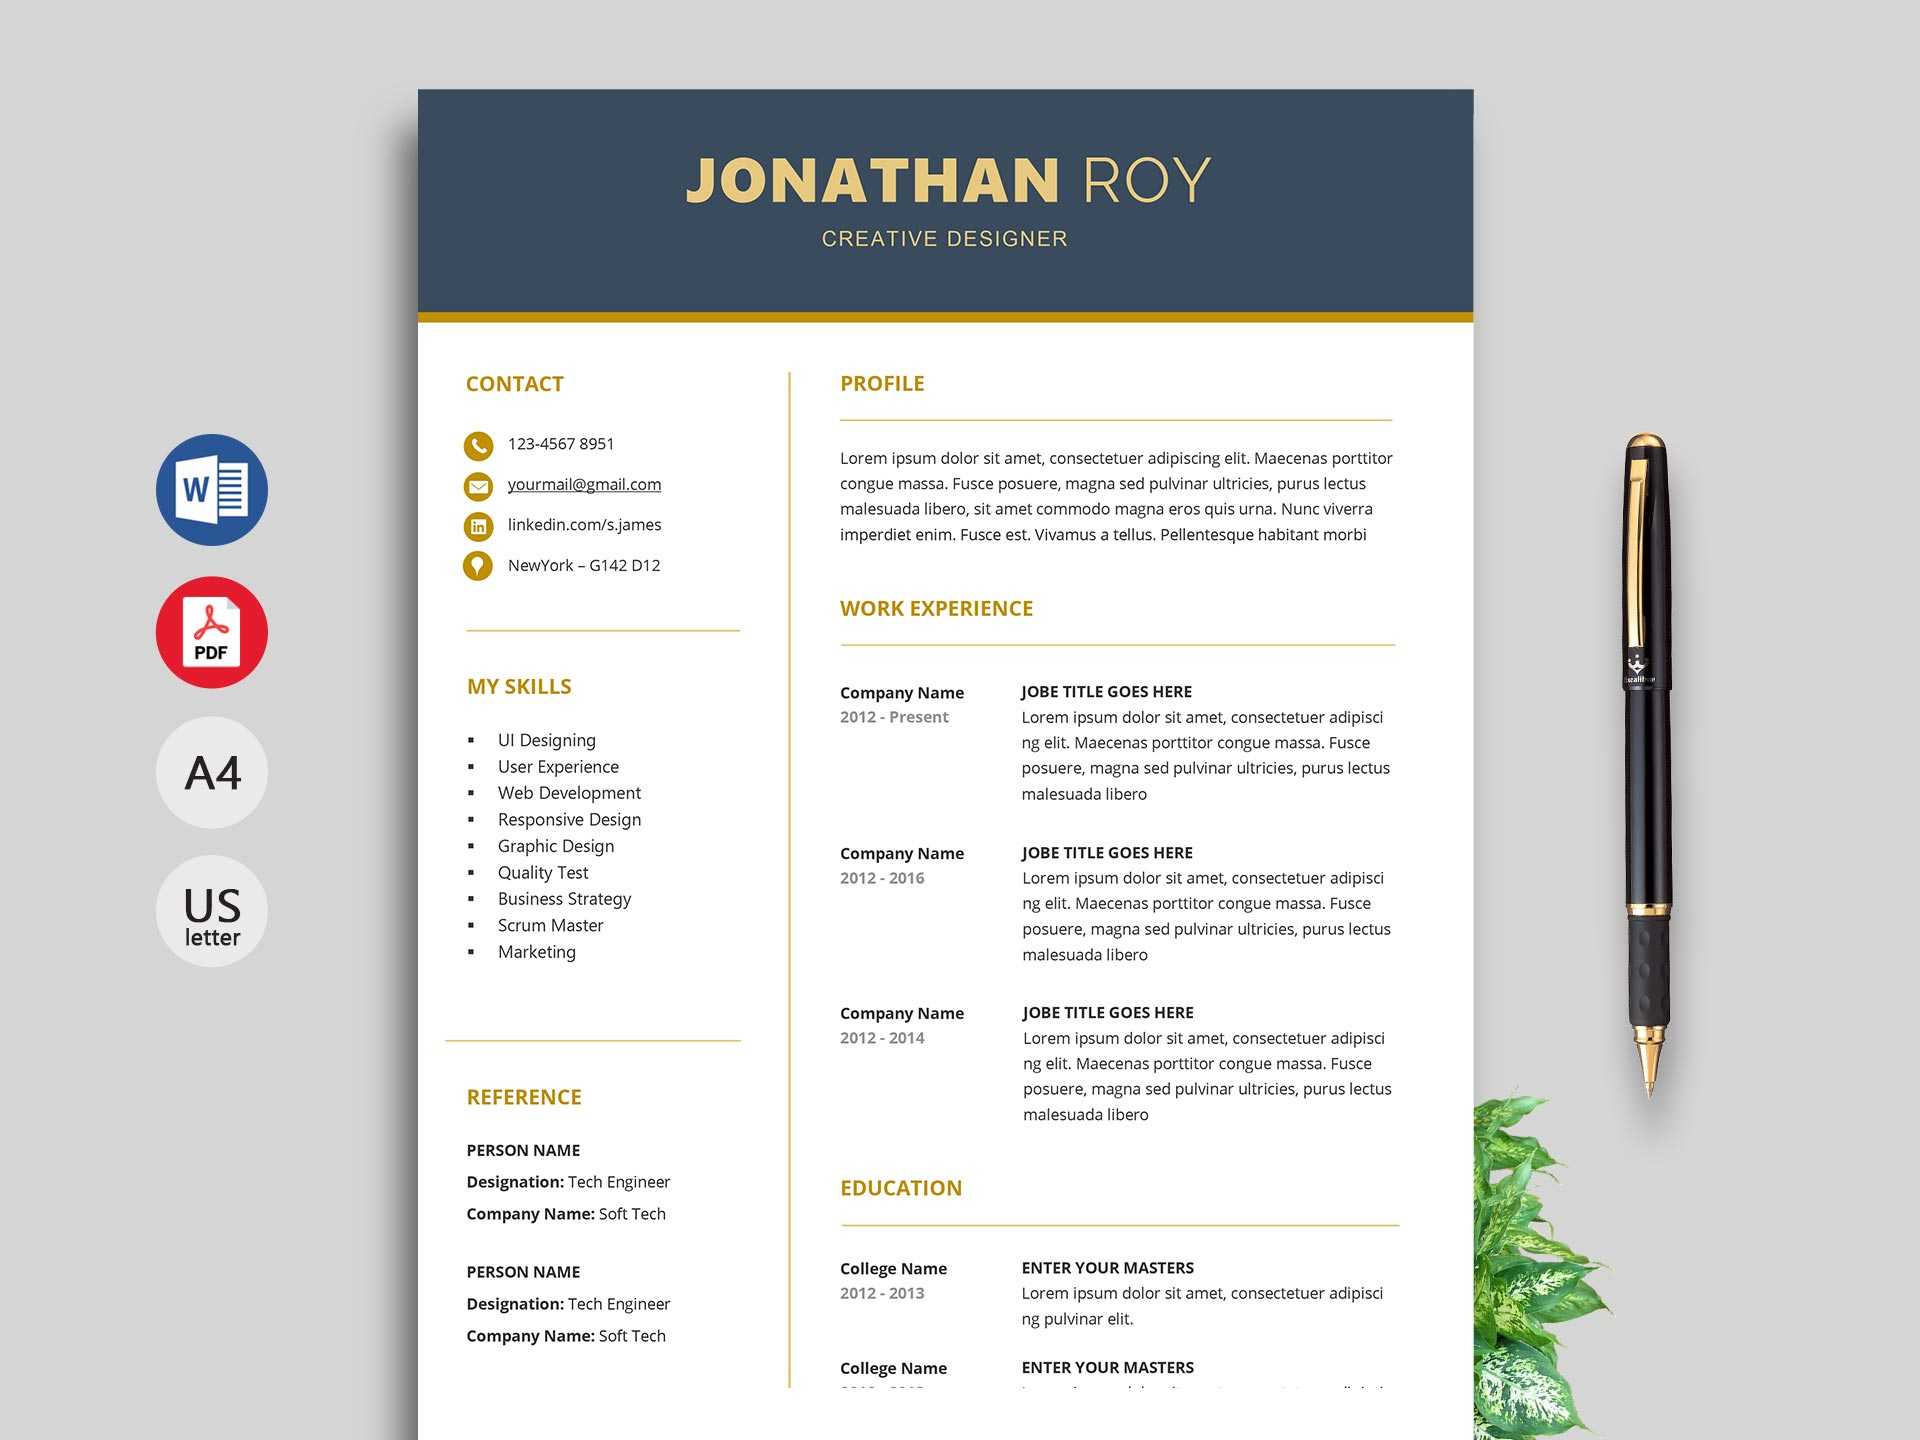 Free Simple Resume & Cv Templates Word Format 2020 | Resumekraft Throughout Free Downloadable Resume Templates For Word